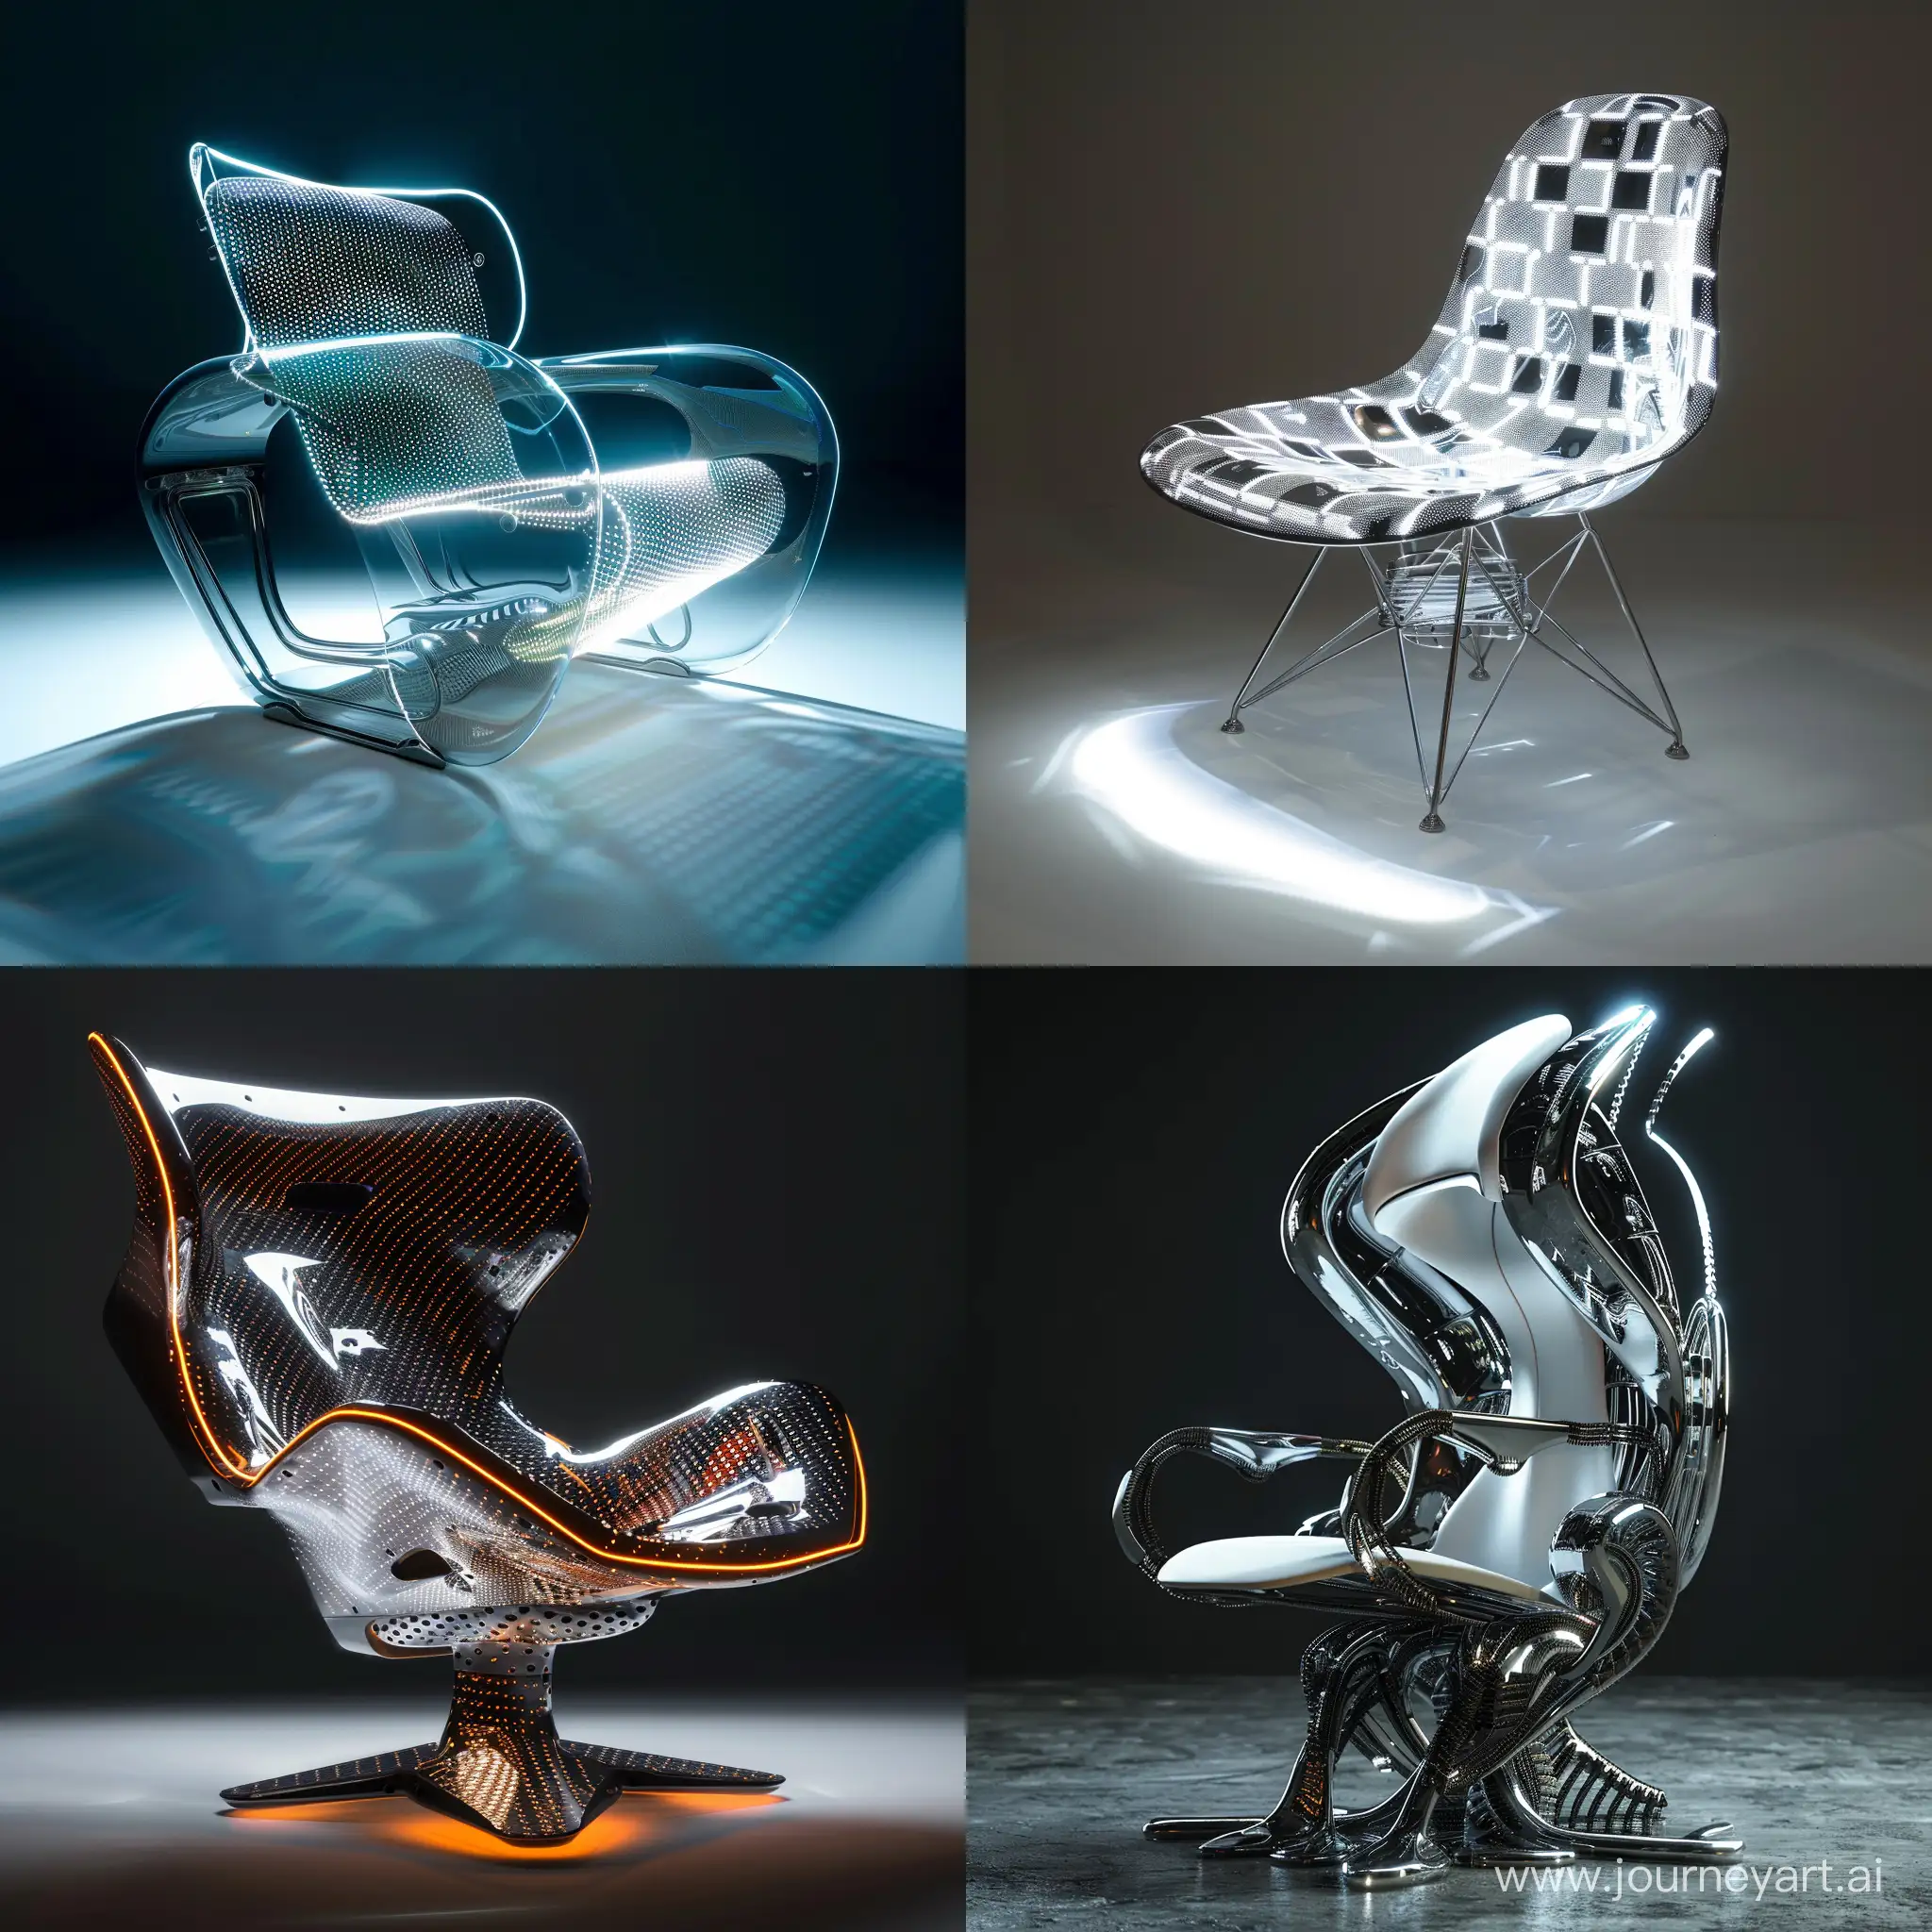 Futuristic-Iron-and-Plastic-Chair-Design-with-High-Detail-and-Bright-Lighting